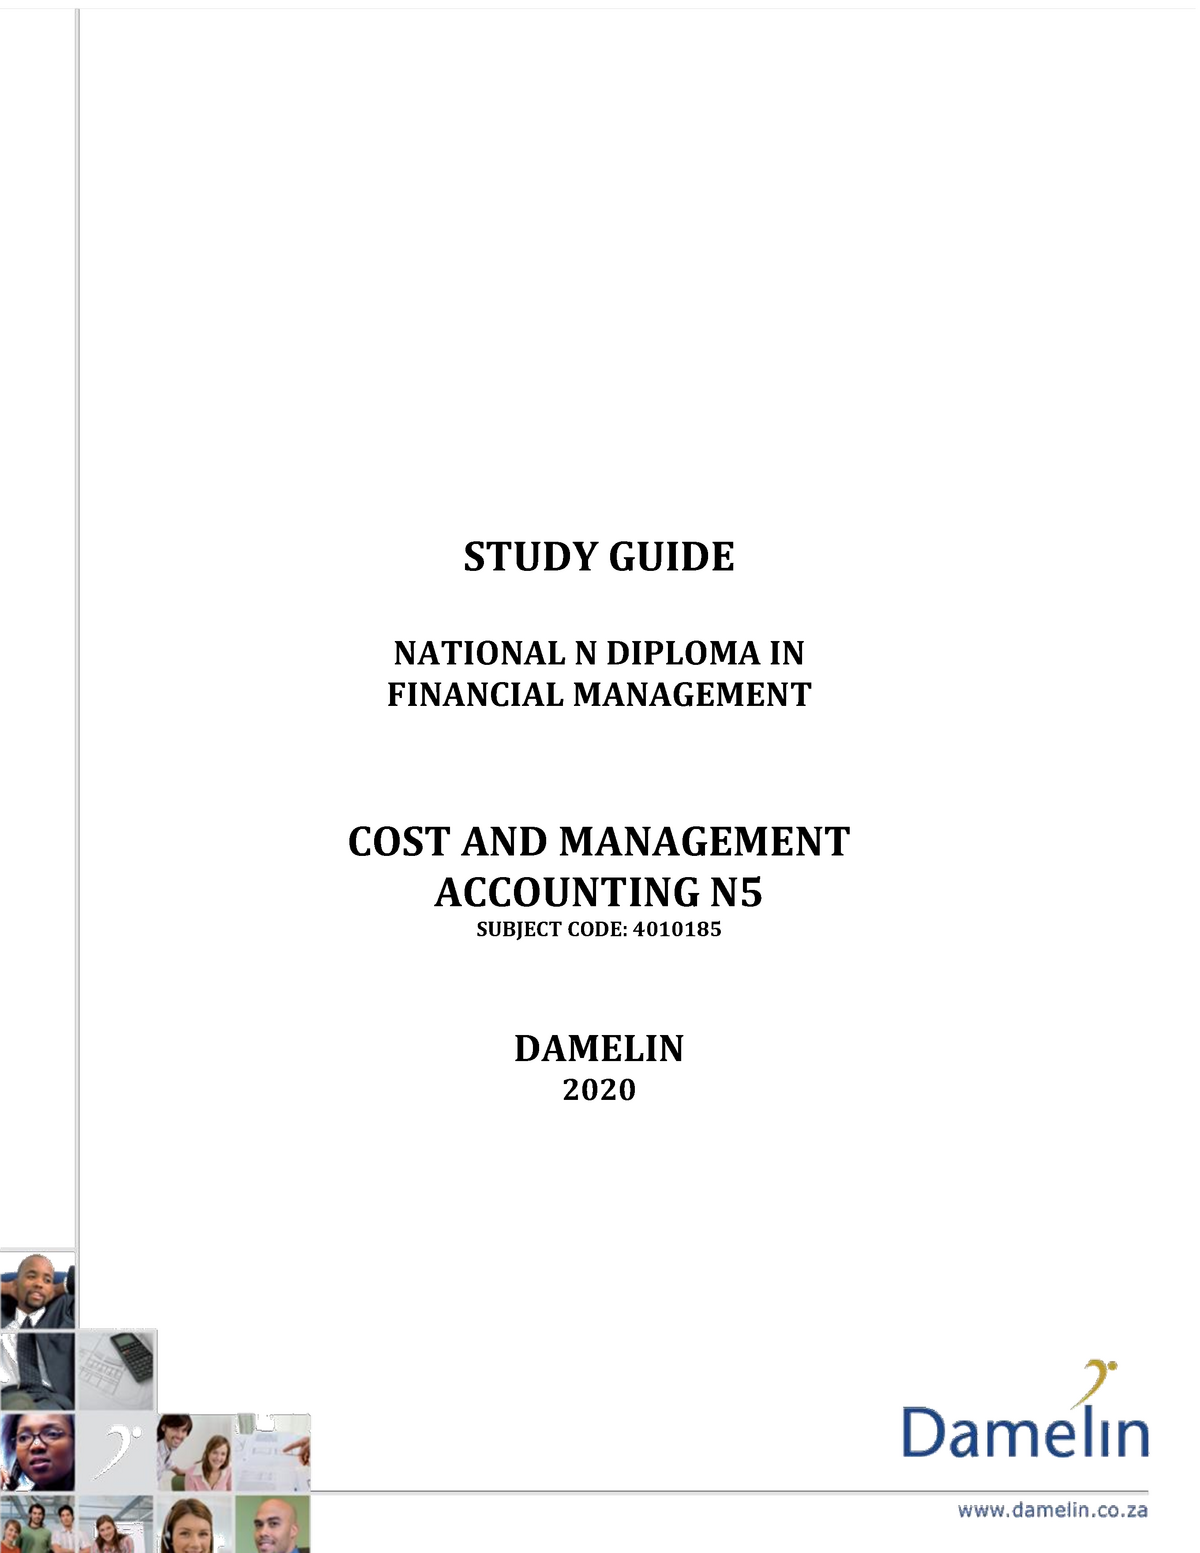 article review on cost and management accounting pdf